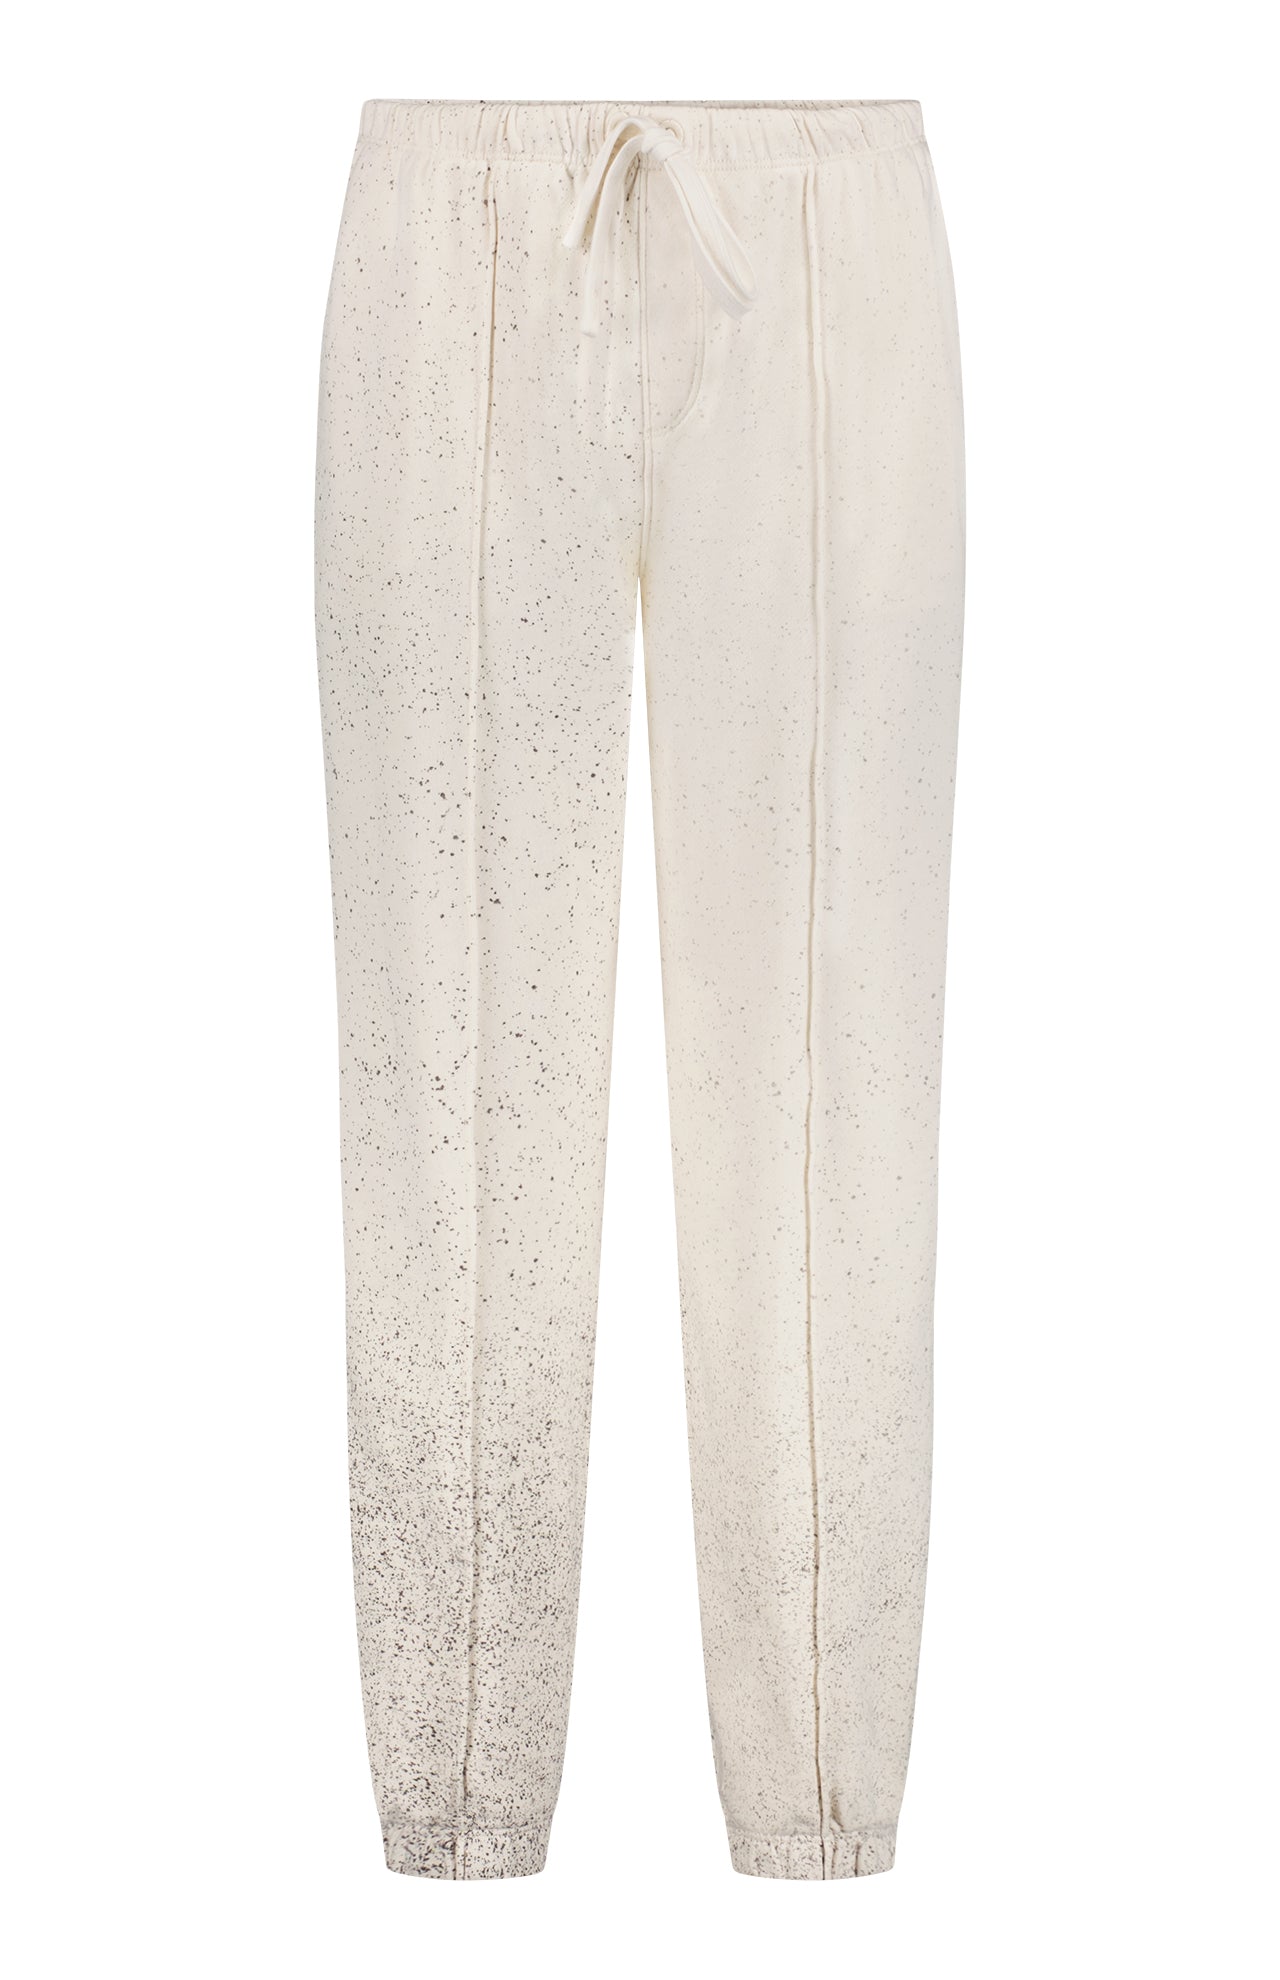 French Terry with Speckled Treatment Sweatpant (7268778115187)